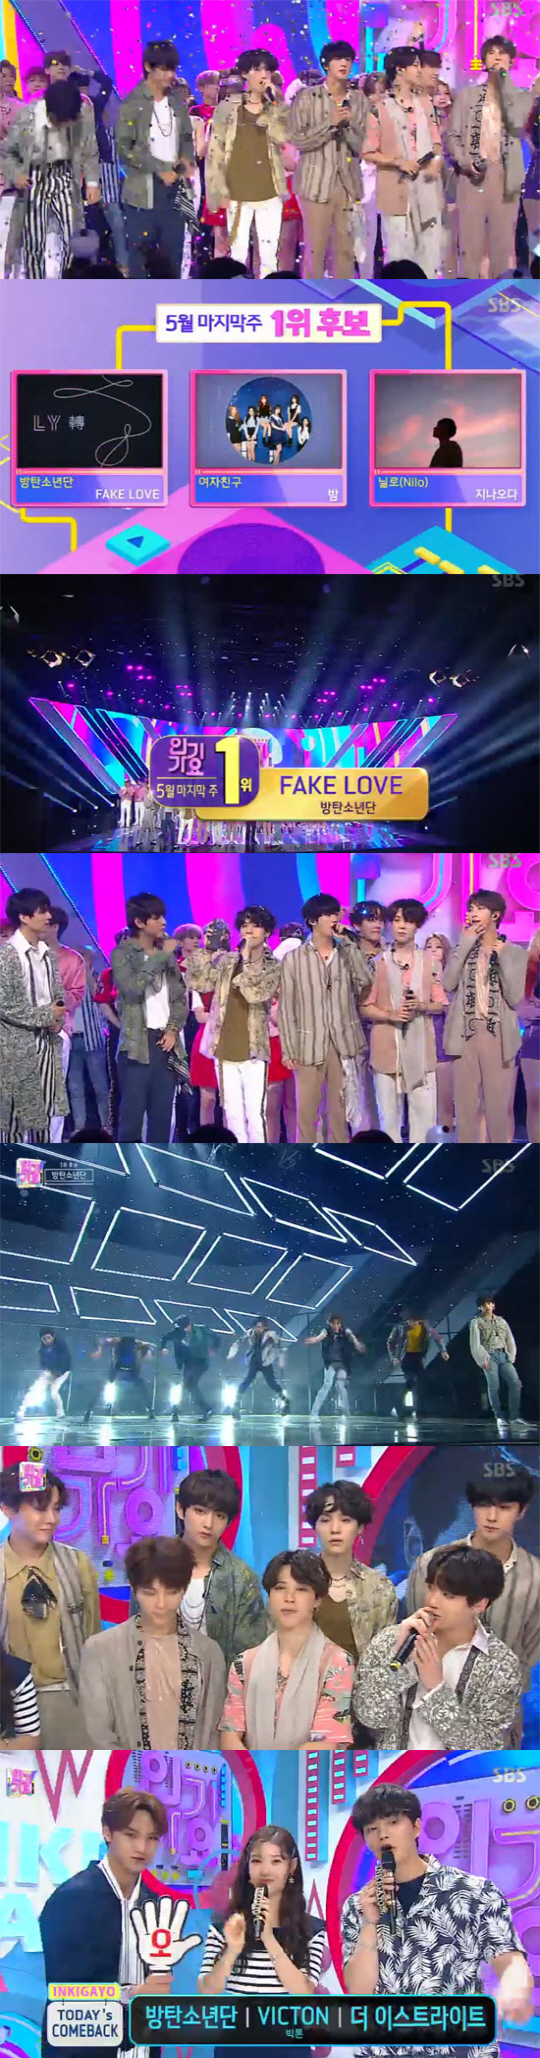 Ami, thank you the most.Global popular K-pop idol BTS is in the top spot with a stark score, and at the same time, three-time kingIm on.On the 27th, SBS music program Inkigayo, BTS comeback show was held.The first candidate on the day was BTS global new song FAKE LOVE, girlfriend s Night and Nilos Ginaoda, and BTS took the first trophy.BTS, who was called number one, simultaneously shouted Ami. RM said, Thank you for the best. After taking the fans first, he said, Thank you.On this day, BTS not only released the title song Fake Love but also Airplane!Part 2 and Anpanman released the stage of the albums songs and showed overwhelming performance.BTS, which has been receiving the attention of former World at the same time as the release of the new album on the 18th, has robbed the attention of the viewer who sees the sword dance and the stage as a manners catching the world on the stage.Especially, Fake Love is a song of aunt hip-hop genre that gives a strange gloomy sound with Grunge Rock guitar sound and groovy trap beat, and it is receiving cheers with unique lyrics and sound of BTS.In addition, BTS showed overwhelming performance with Airplane! Part 2 and Anpanman.Asked about the birth of a new record that continued in the interview, BTS said, I have a lot of goals since I went to Billboard.I think there will be a lot of good things if we work hard as we have done so far. We will do our best on music broadcasts and given stages in the future, RM said. We will also work hard to prepare concerts starting in August.Also on the day, The East Bonnie Wright also made a comeback with Sulame and Let Me Stay With You.The East Light, which is comeback as a second mini album in about 10 months, stimulated the girl with a teenage band-like look.In addition, Jeon Min-ju and Yuna Kim made their hot debut as duo Khan. Khans Im Your Girl?Is a medium tempo R & B song with a sensual hip-hop beat and a trendy electronic pop sensibility. It has a sensual drawing of a complex inner mind that goes up and down toward the opponent who takes an ambiguous gesture.Meanwhile, Inkigayo featured BTS, Winner, TinTop, Cross Jean, Lovelys, Enflying, Bigton, Ben, (girls) Kids, The East Bonnie Wright, Canto, Khan, Spectrum and Gracie.